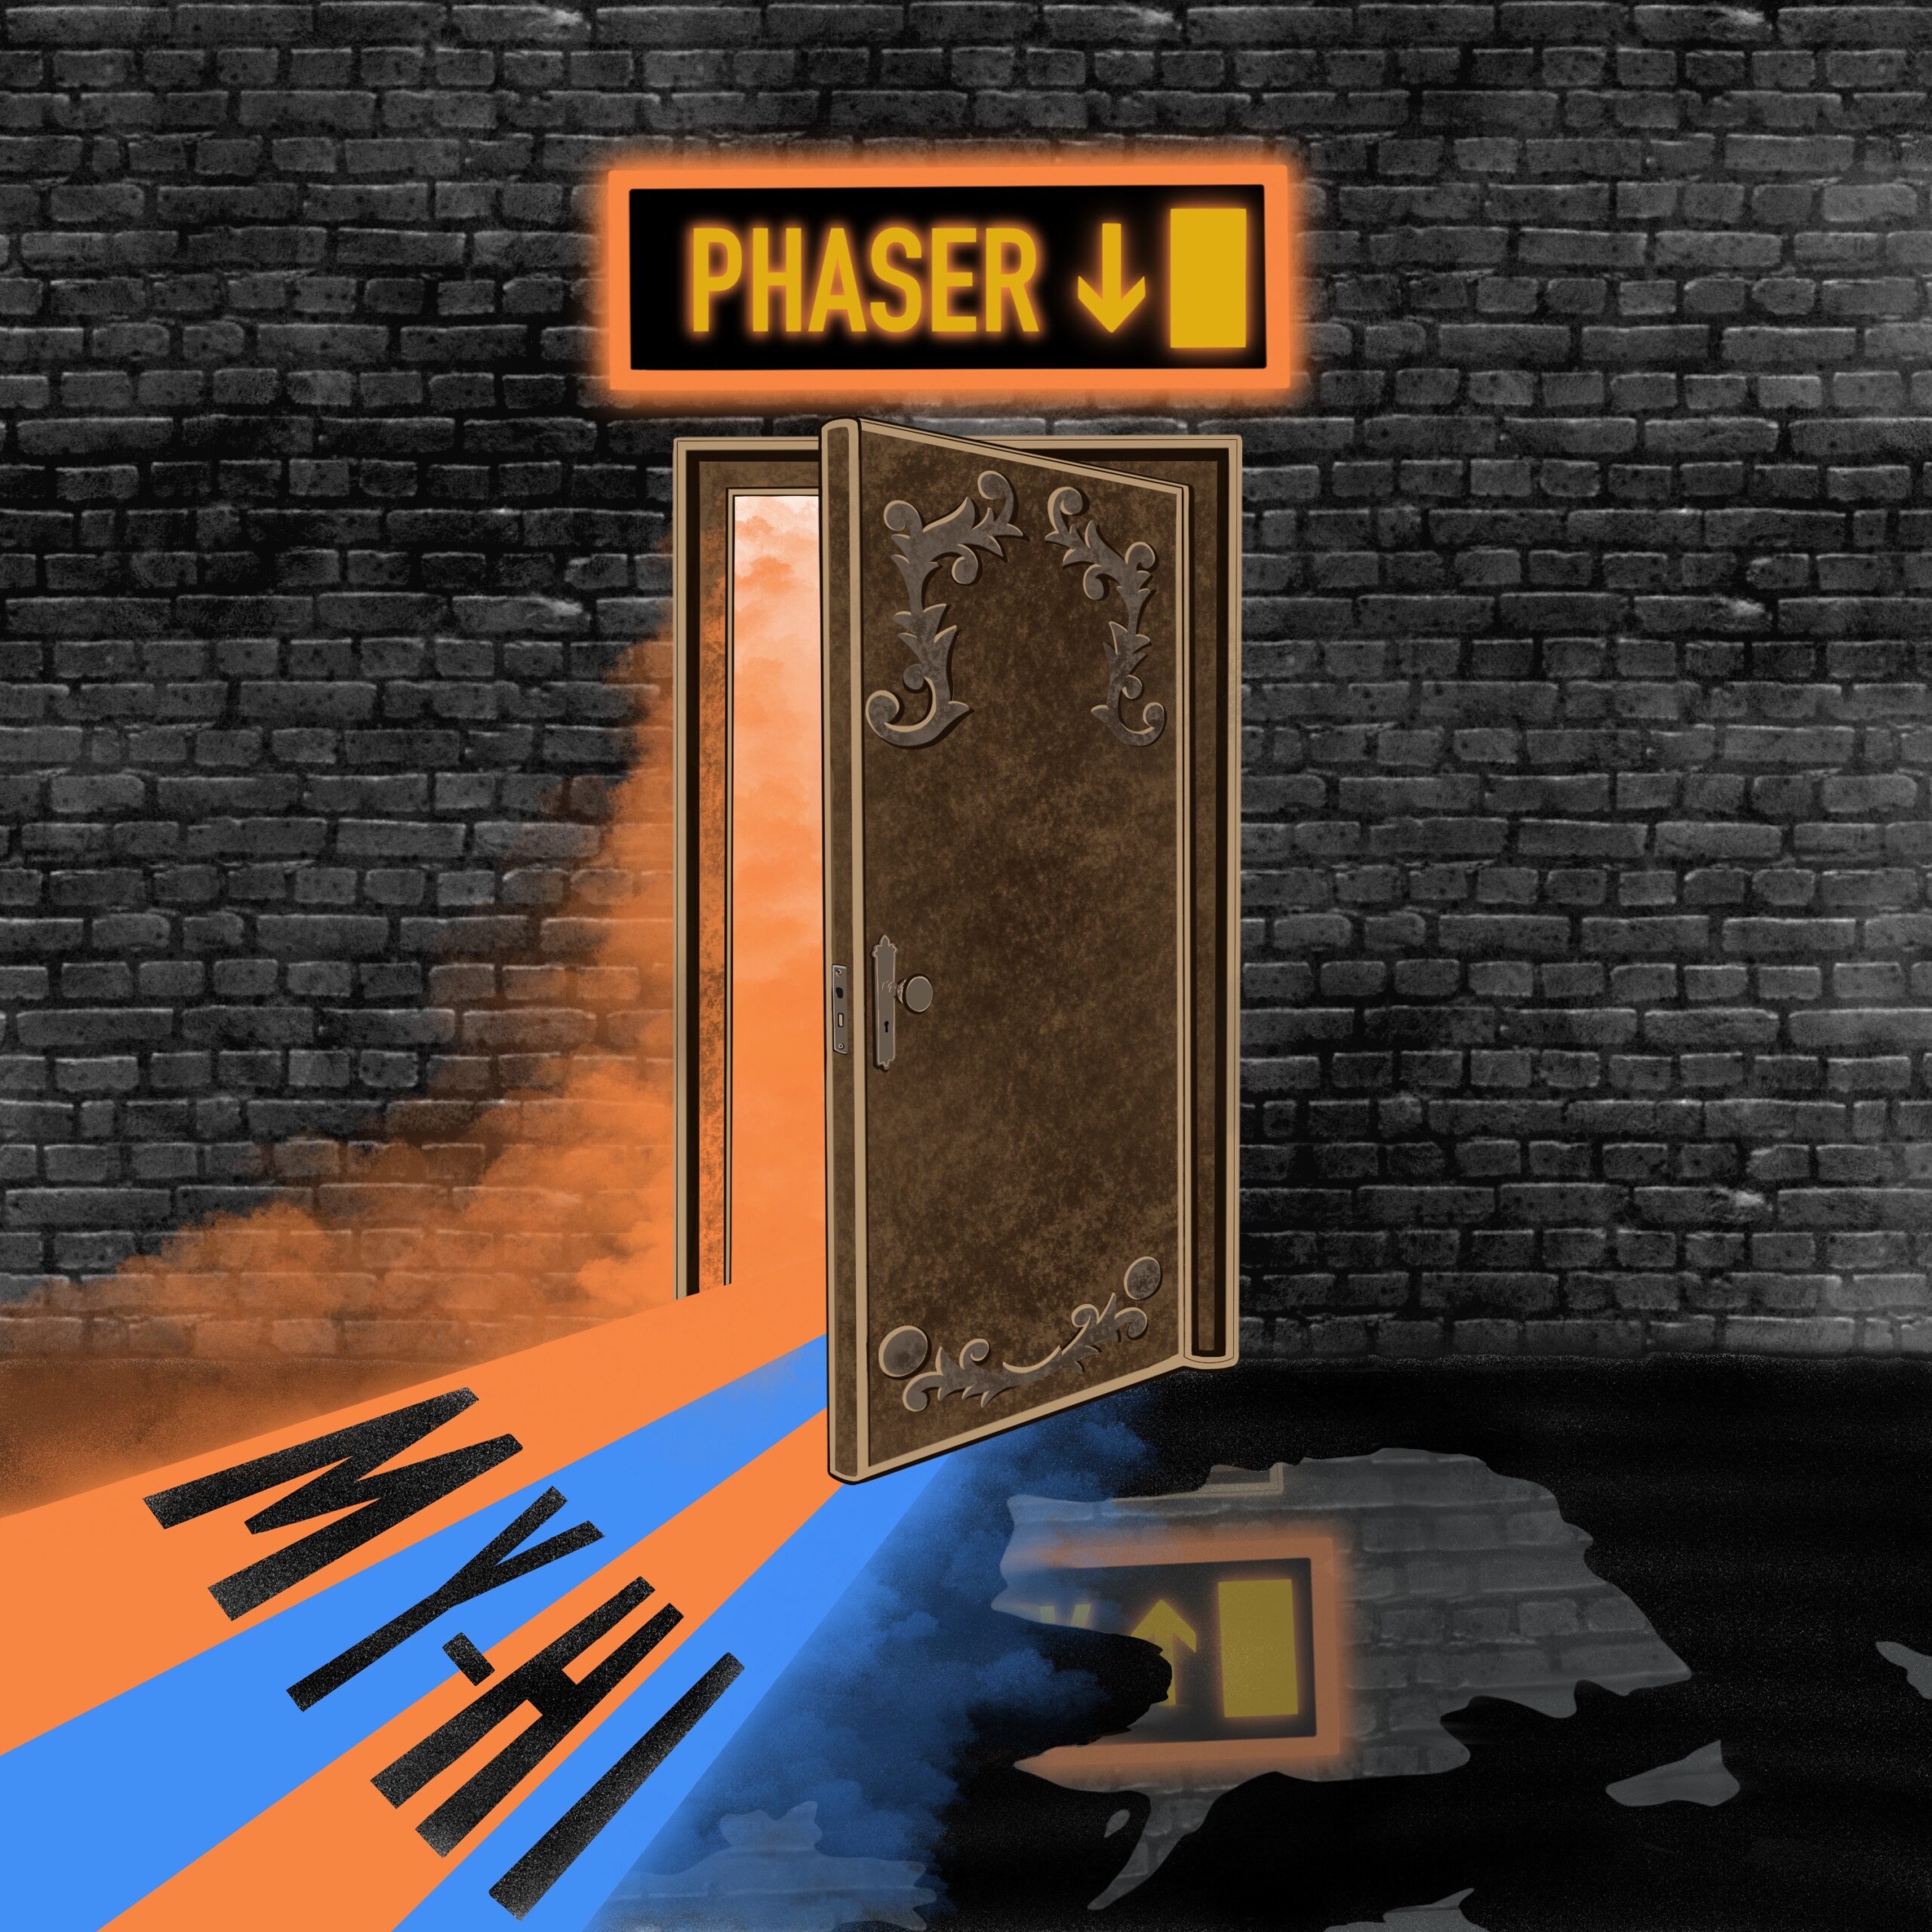 HOT TRACK: “Phaser” by MY-HI